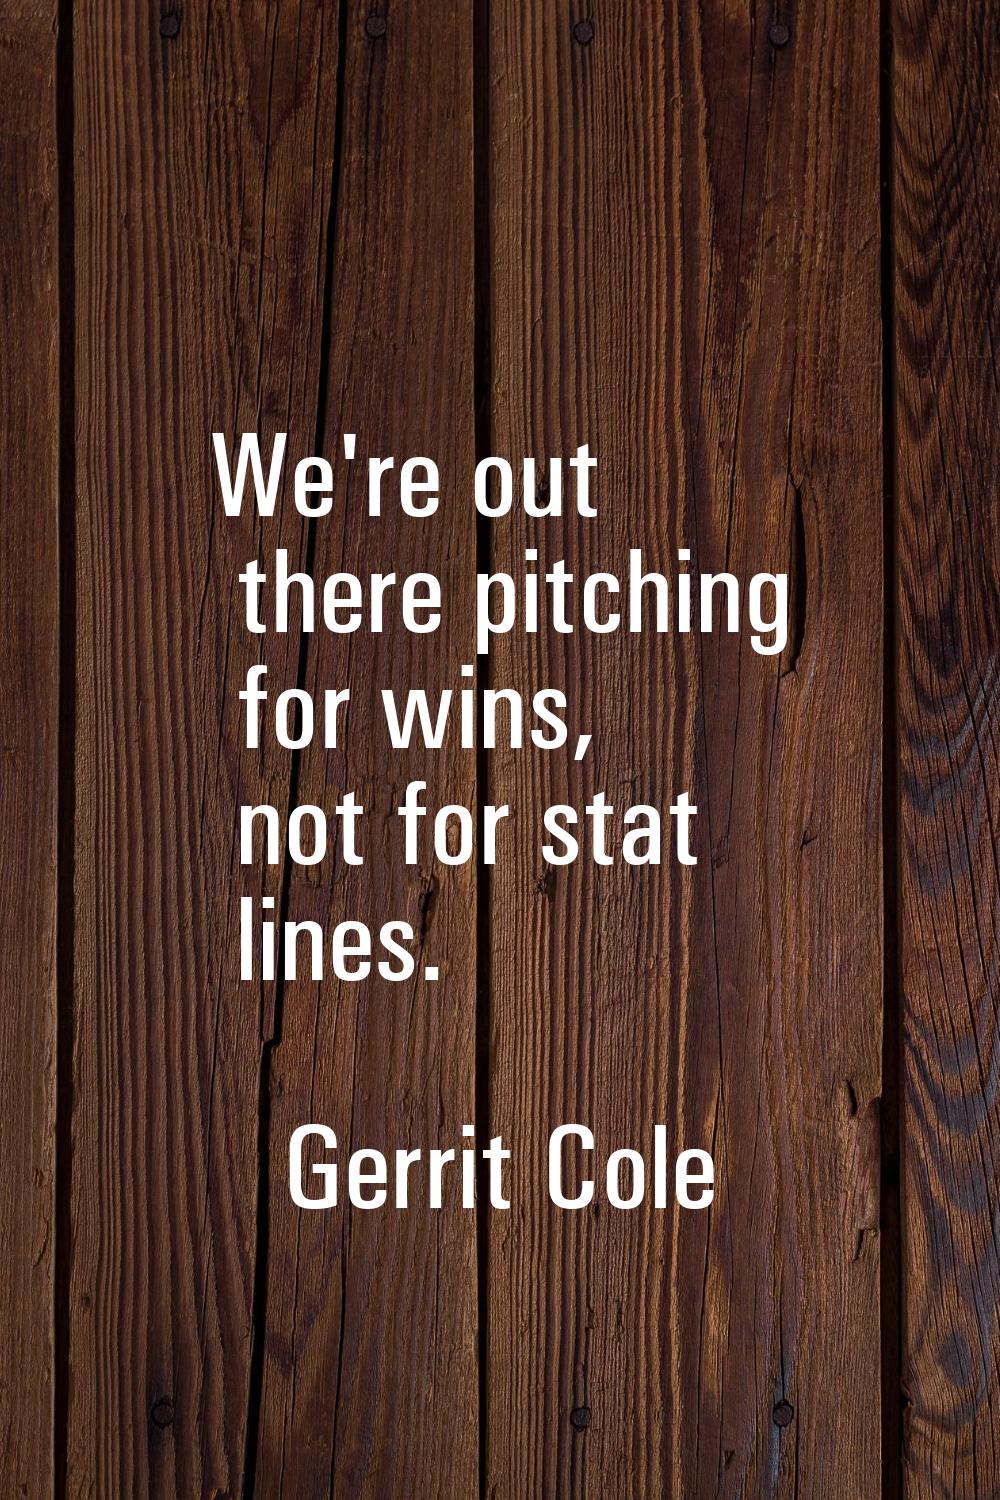 We're out there pitching for wins, not for stat lines.